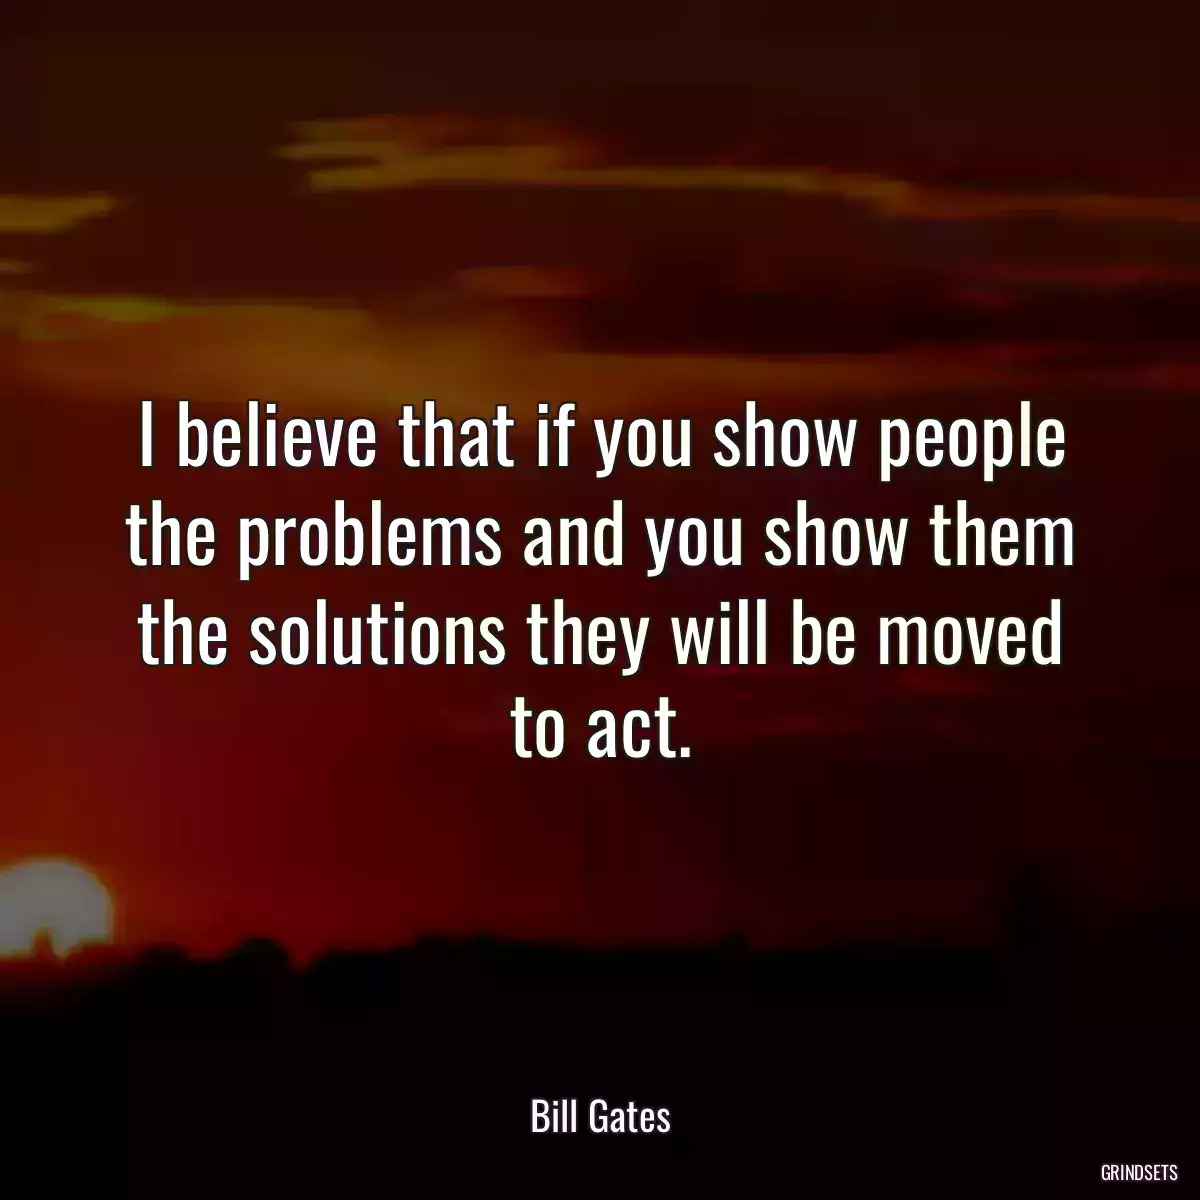 I believe that if you show people the problems and you show them the solutions they will be moved to act.